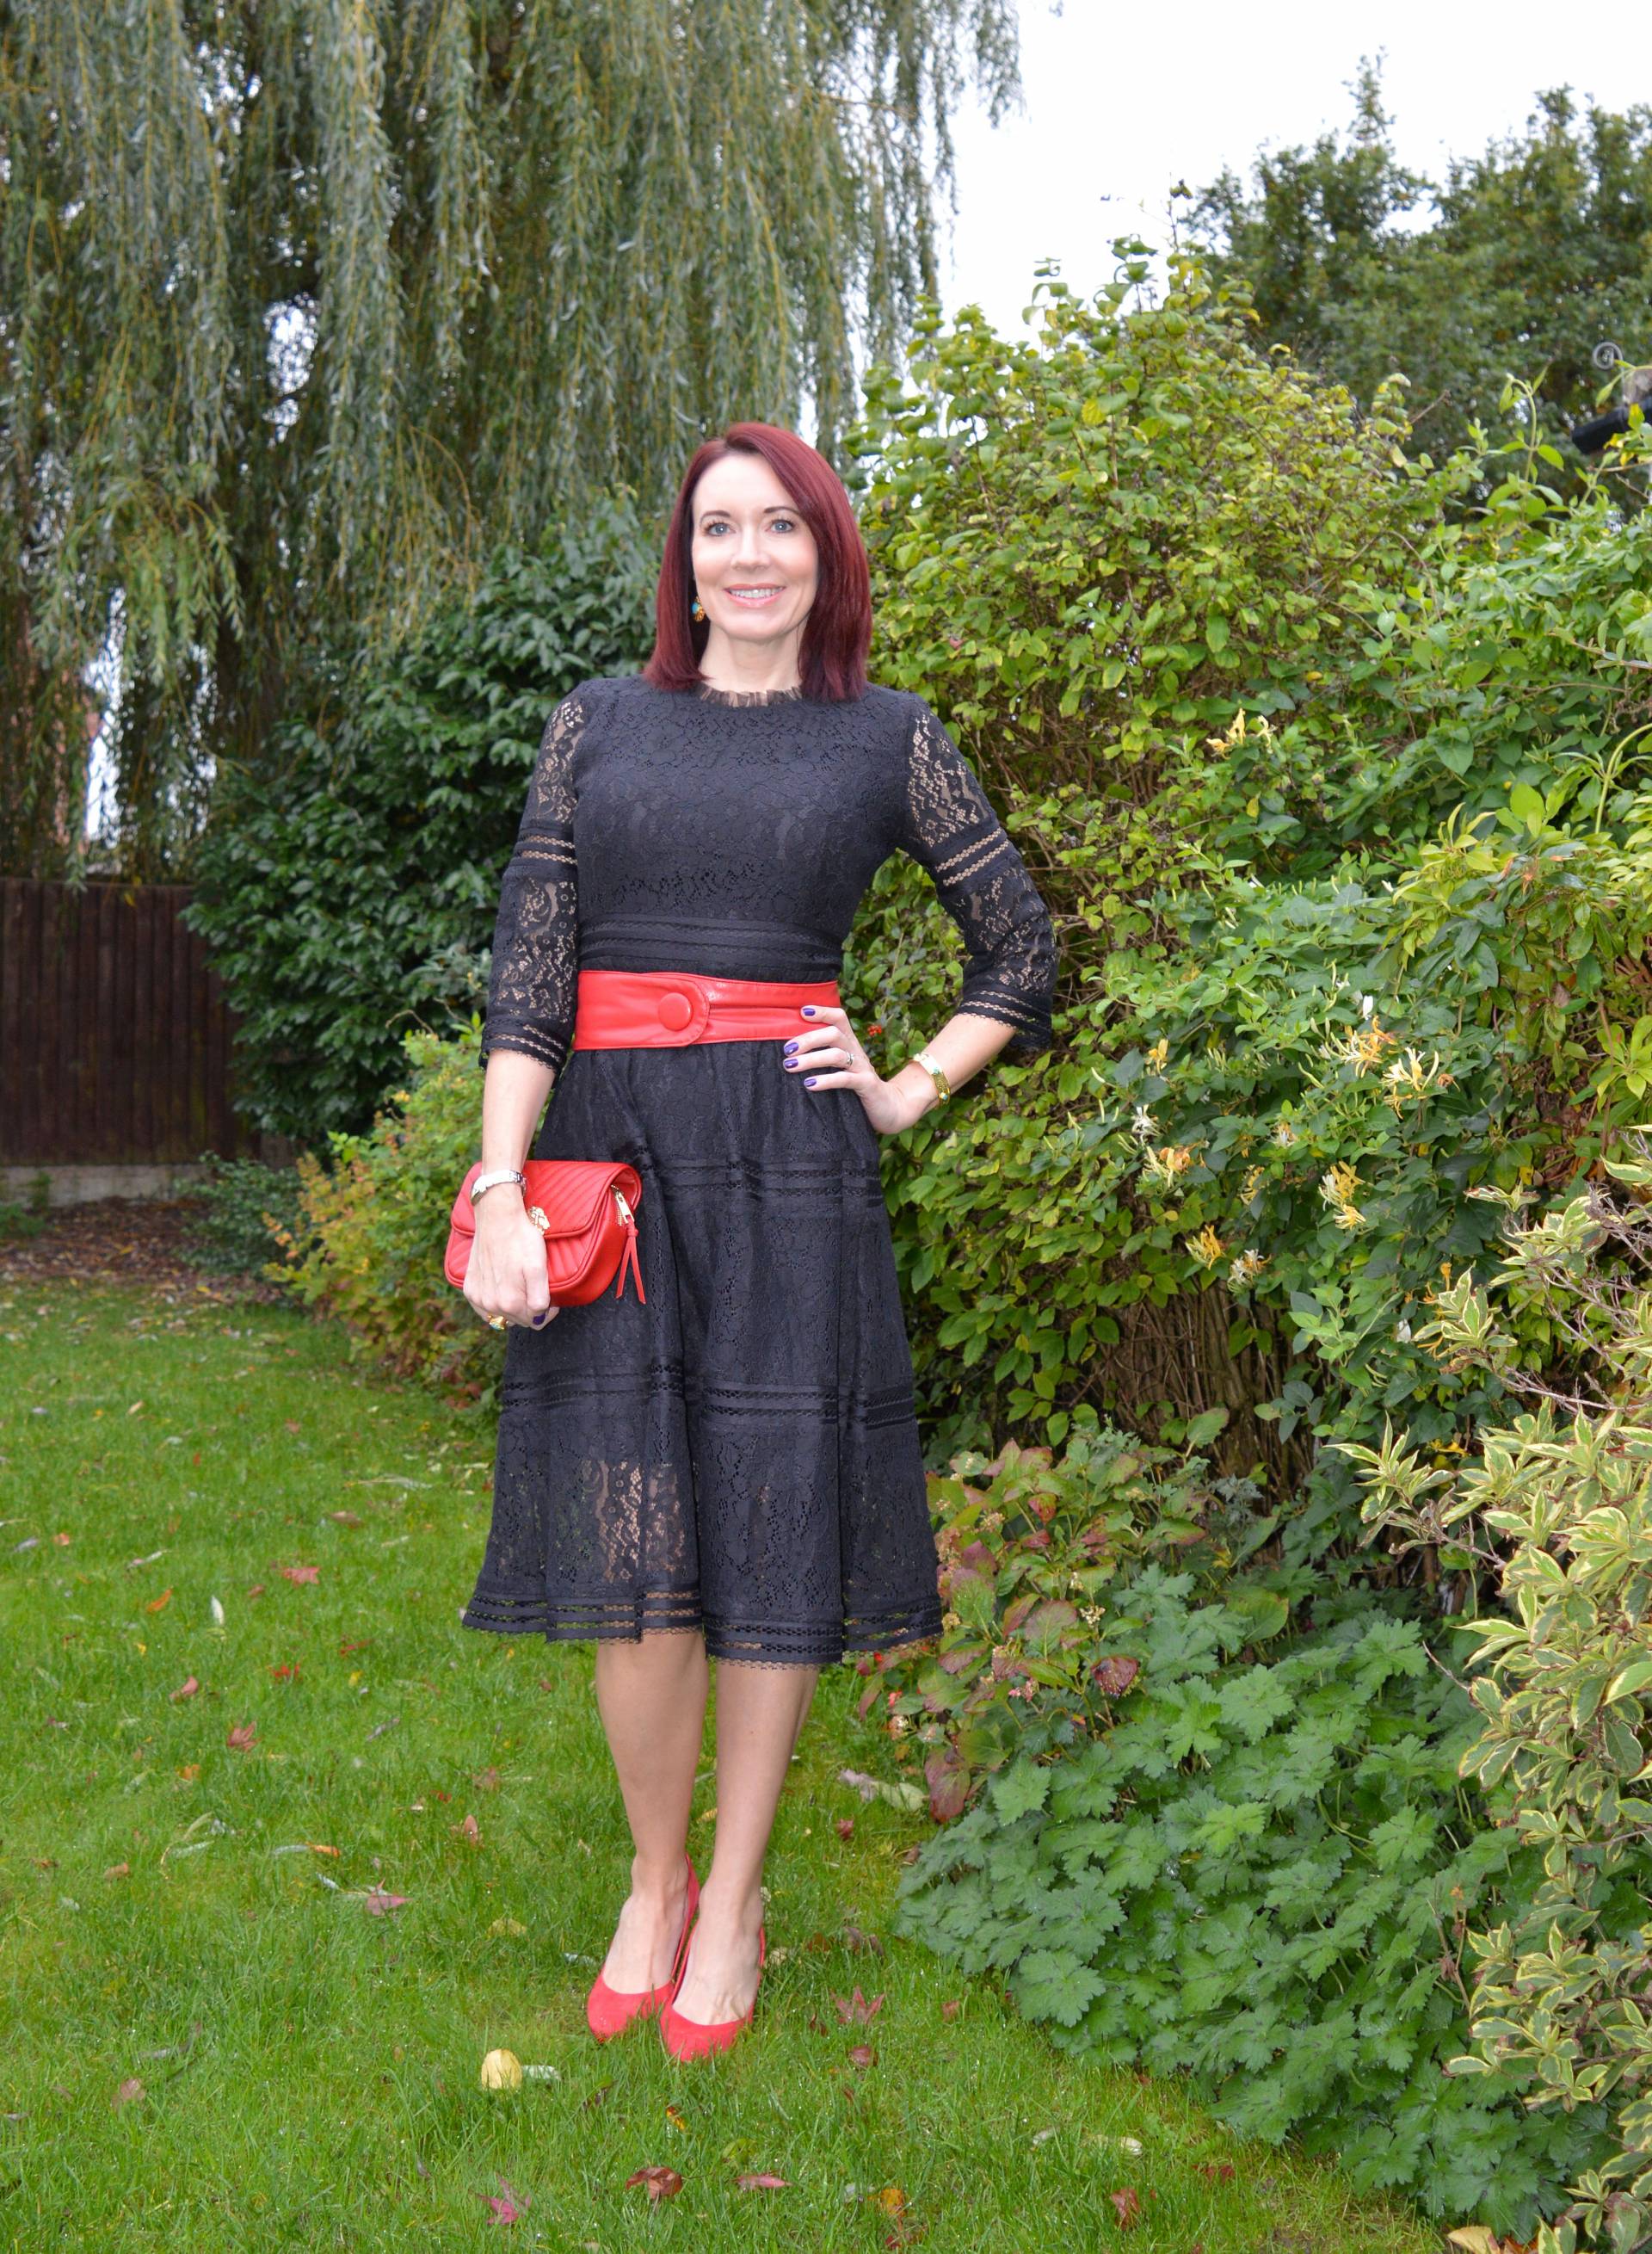 Black lace dress with red accessories + ...